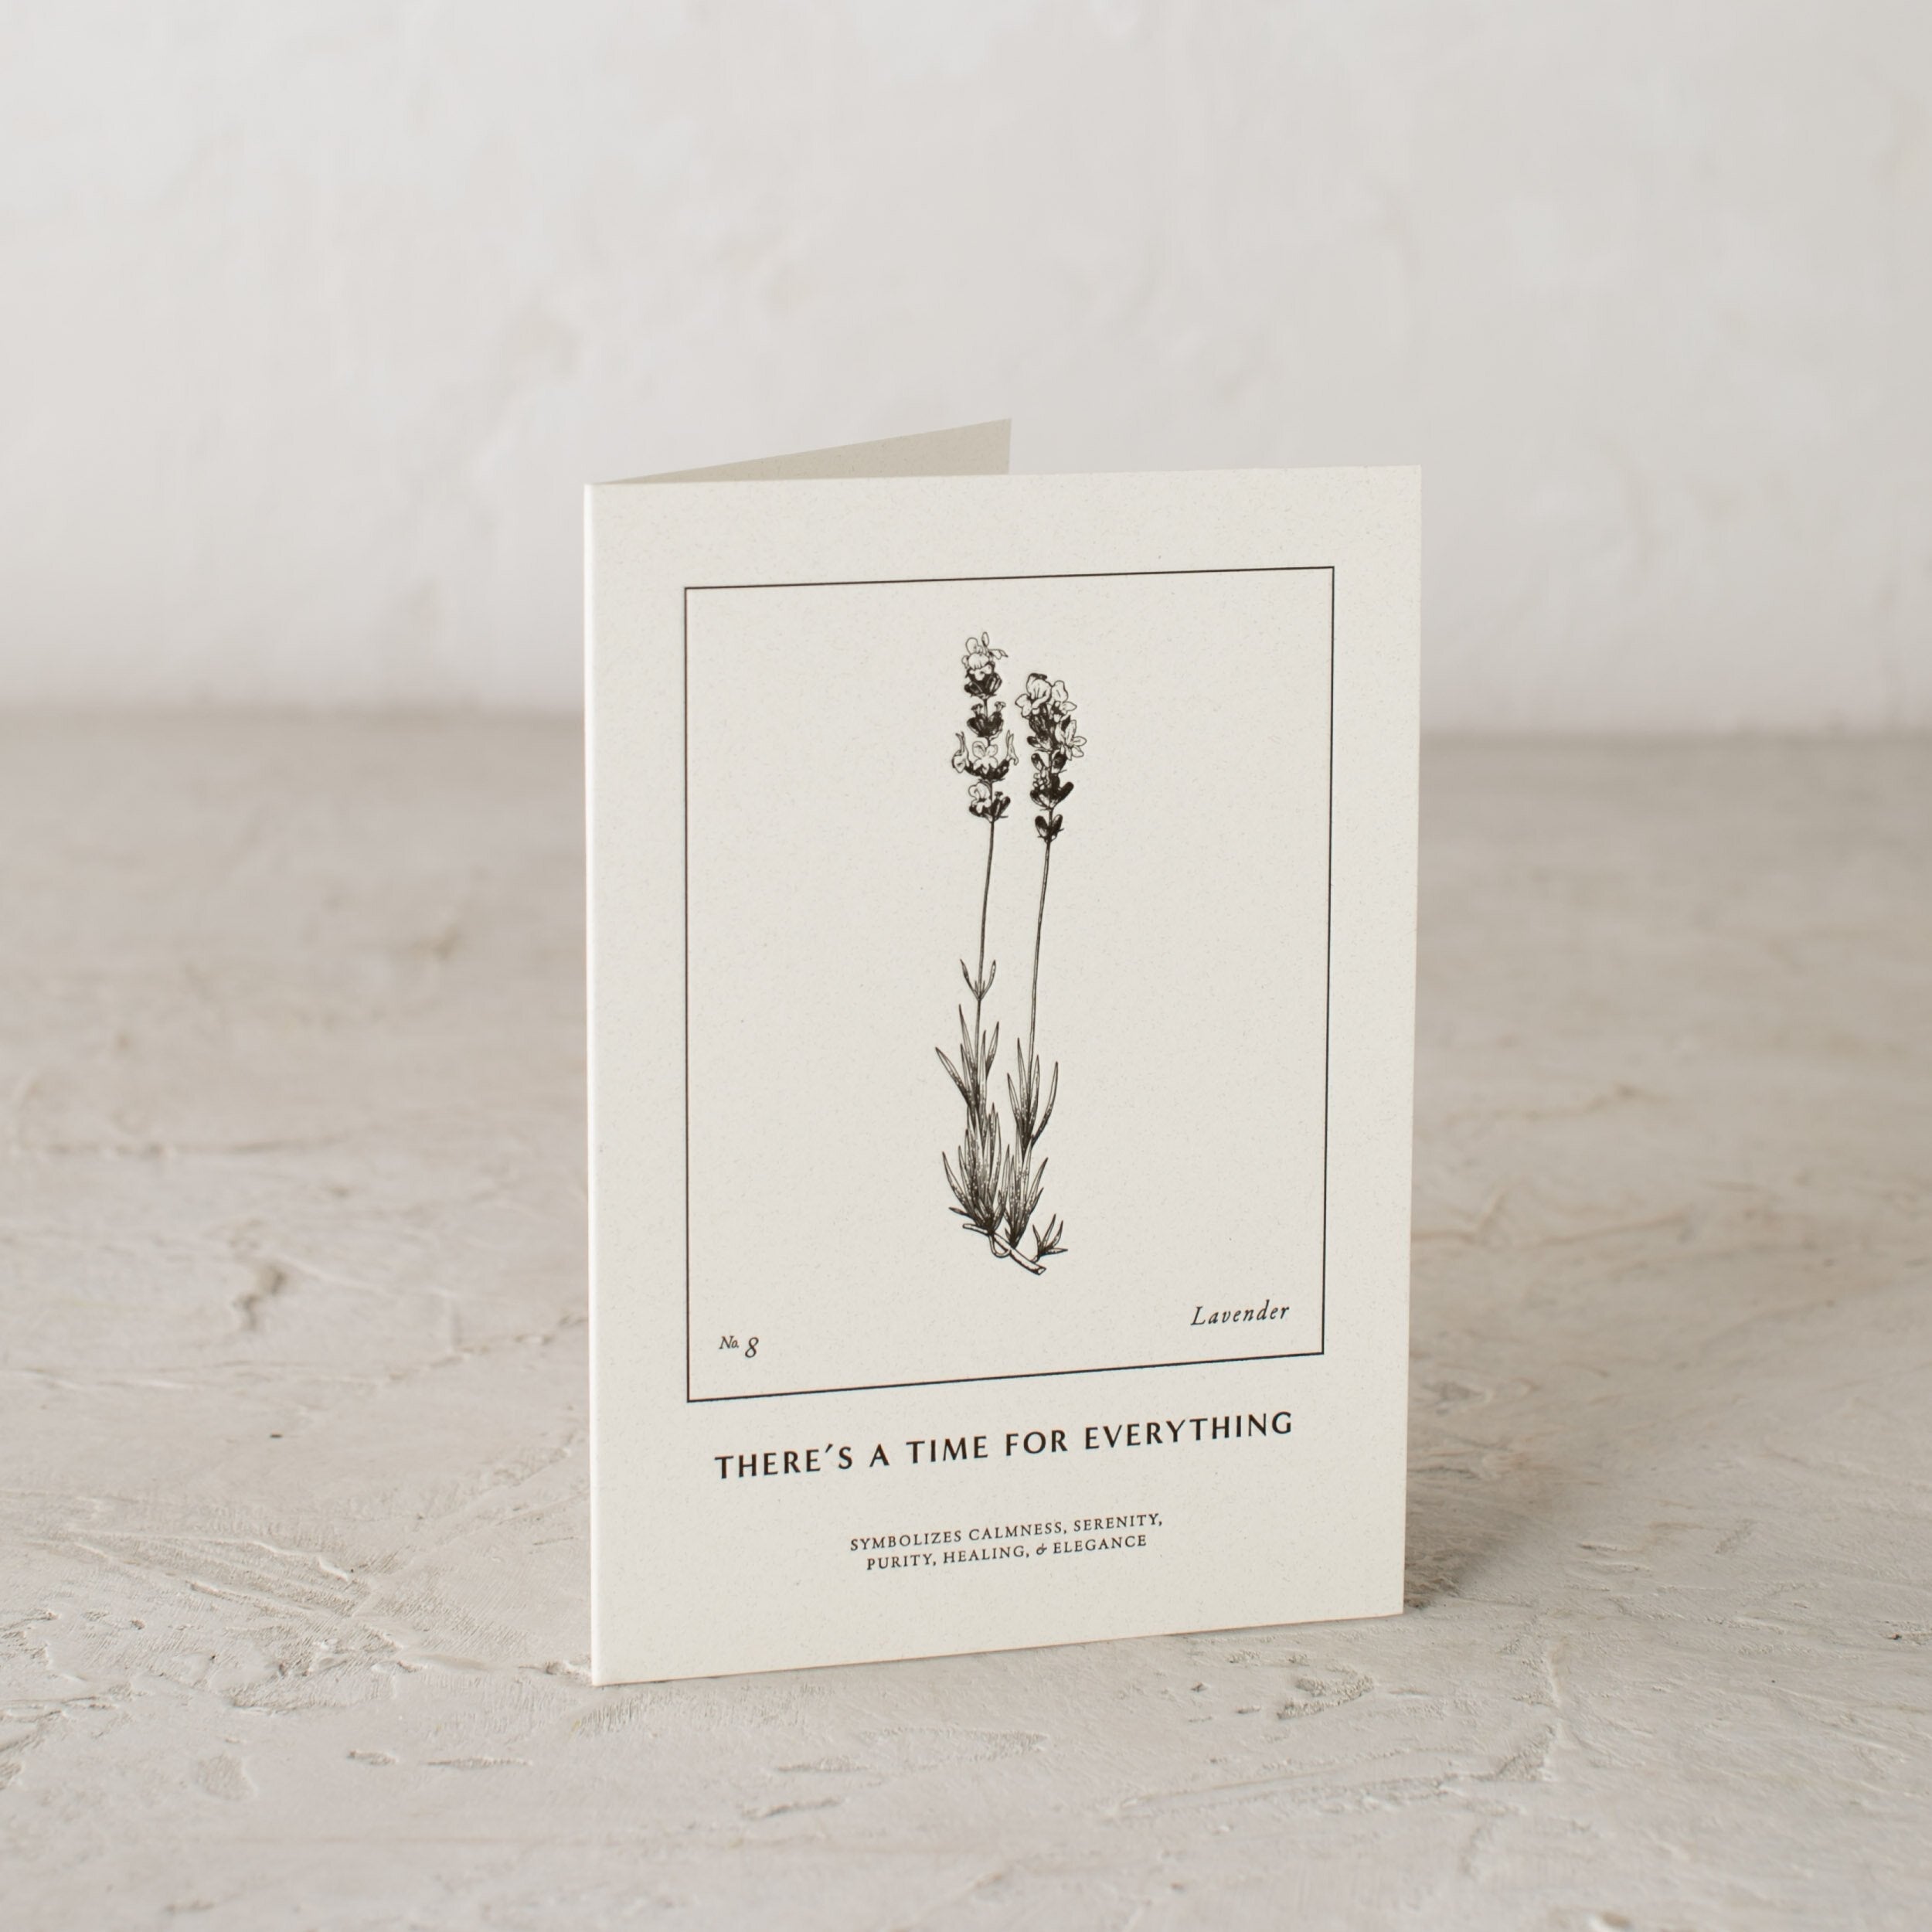 Letter pressed greeting card with a botanical illustrated Lavender, "There's a Time for Everything" - Symbolizes Calmness, serenity, purity, healing and elegance." Designed and sold by Verdant, Kansas City.